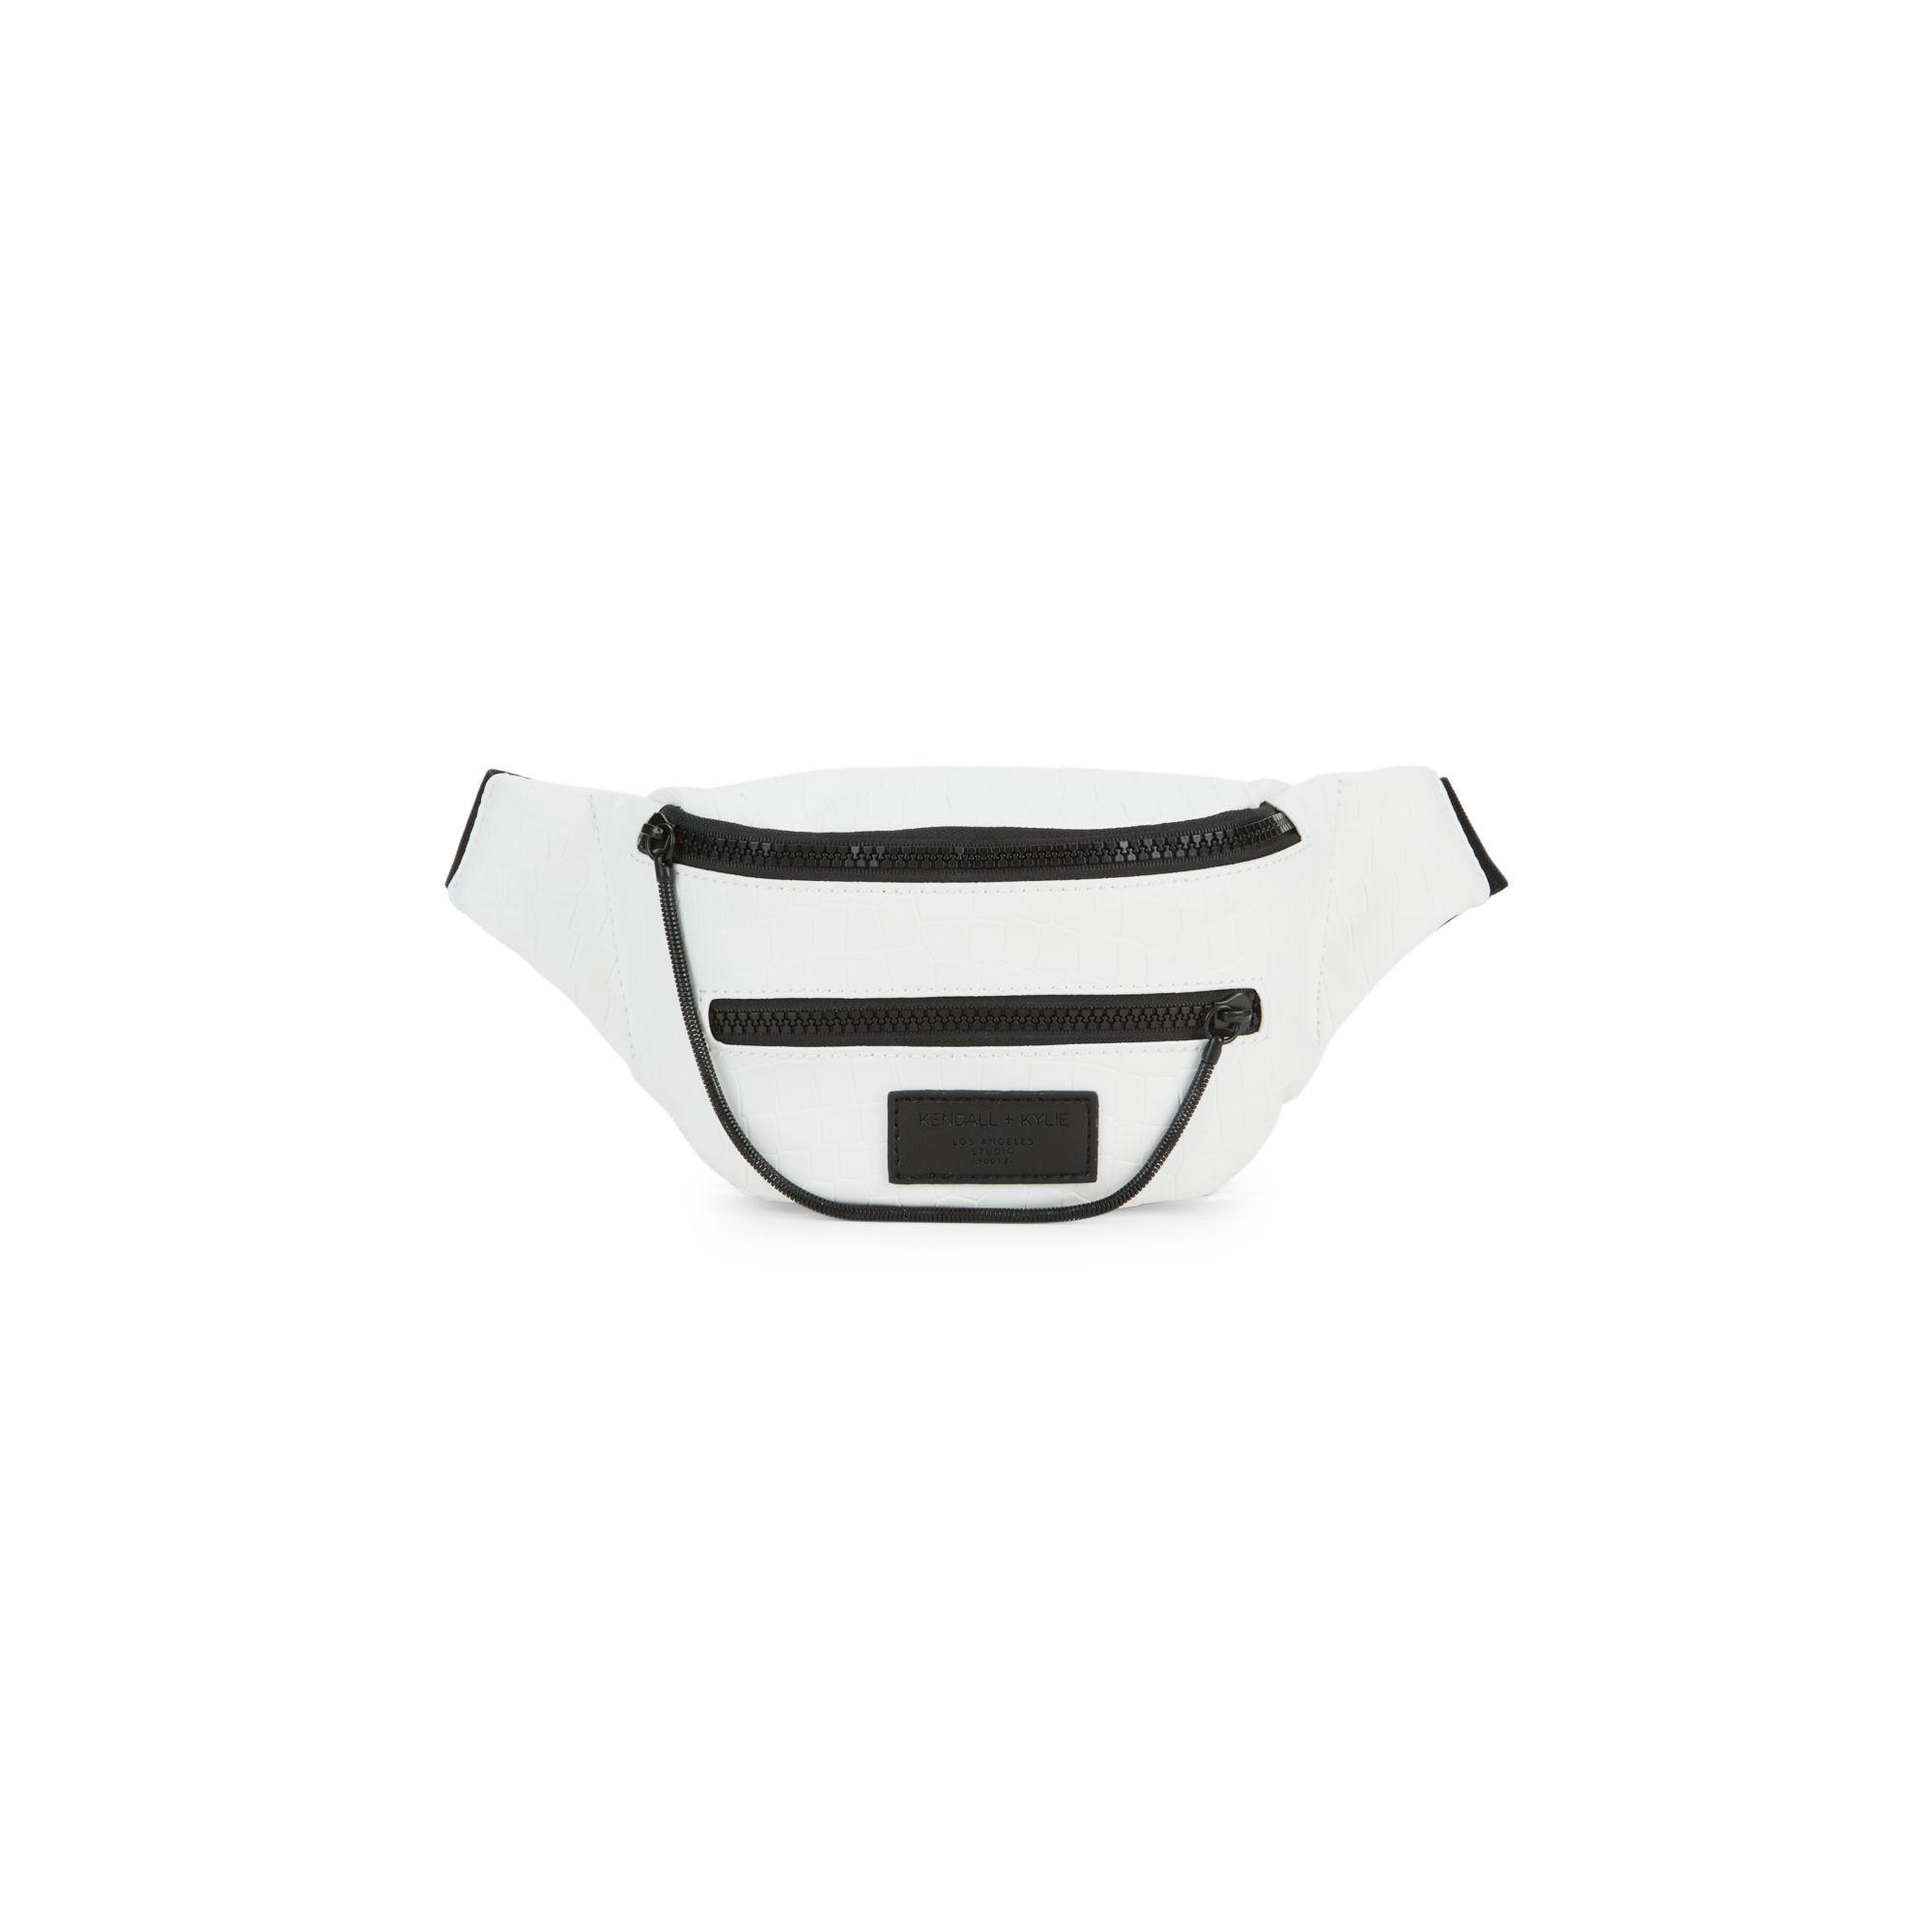 Kendall + Kylie Carina Faux Leather Fanny Pack in White - Lyst